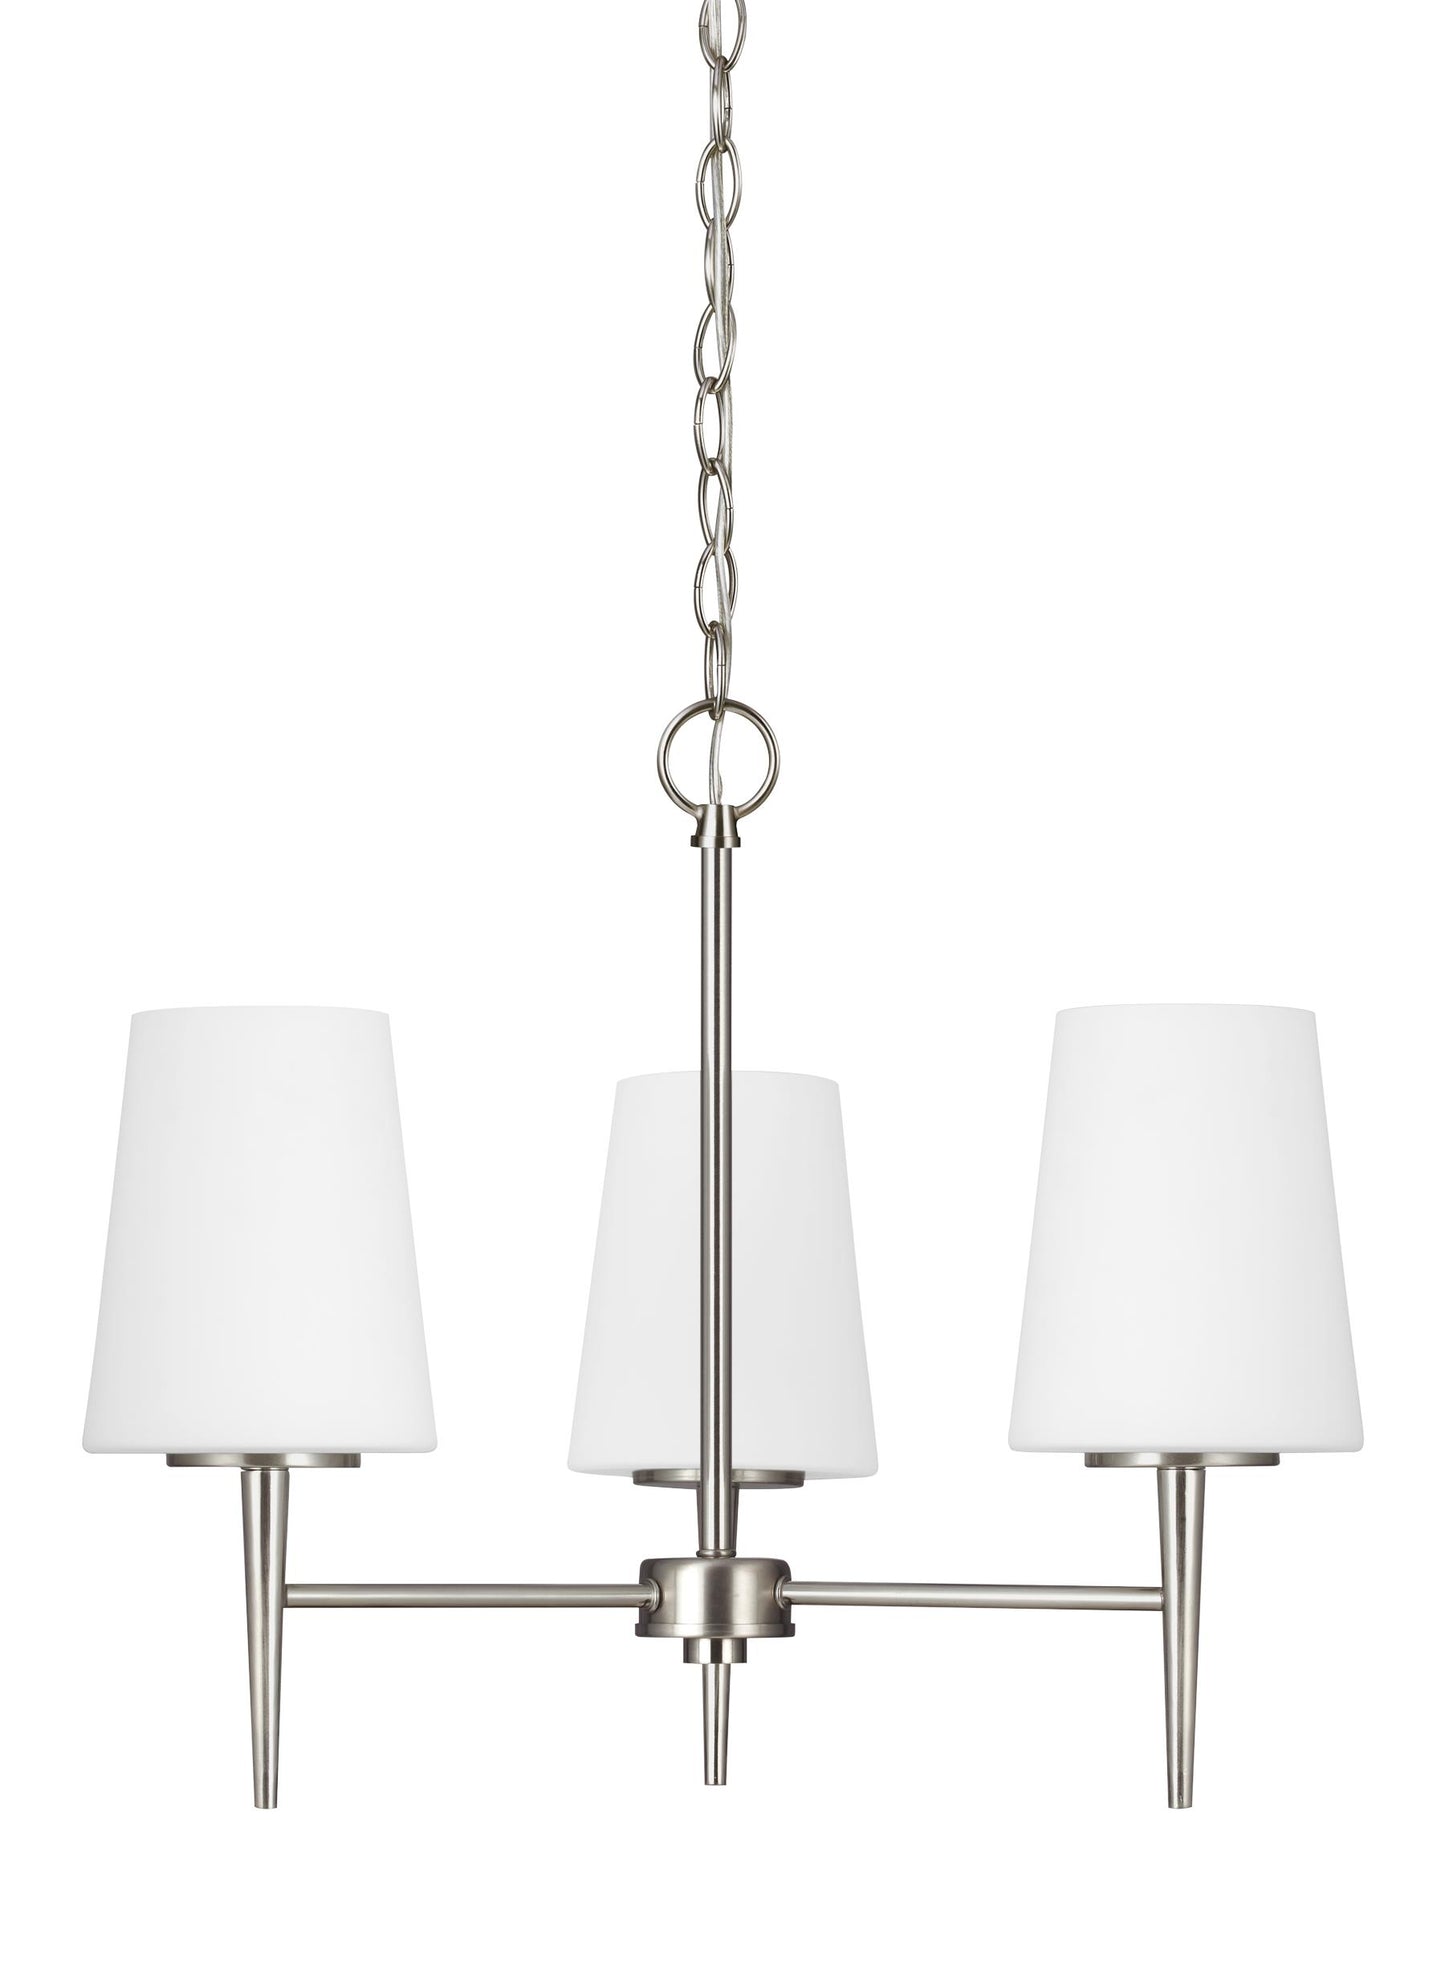 Driscoll contemporary 3-light indoor dimmable ceiling chandelier pendant light in brushed nickel silver finish with cased ...